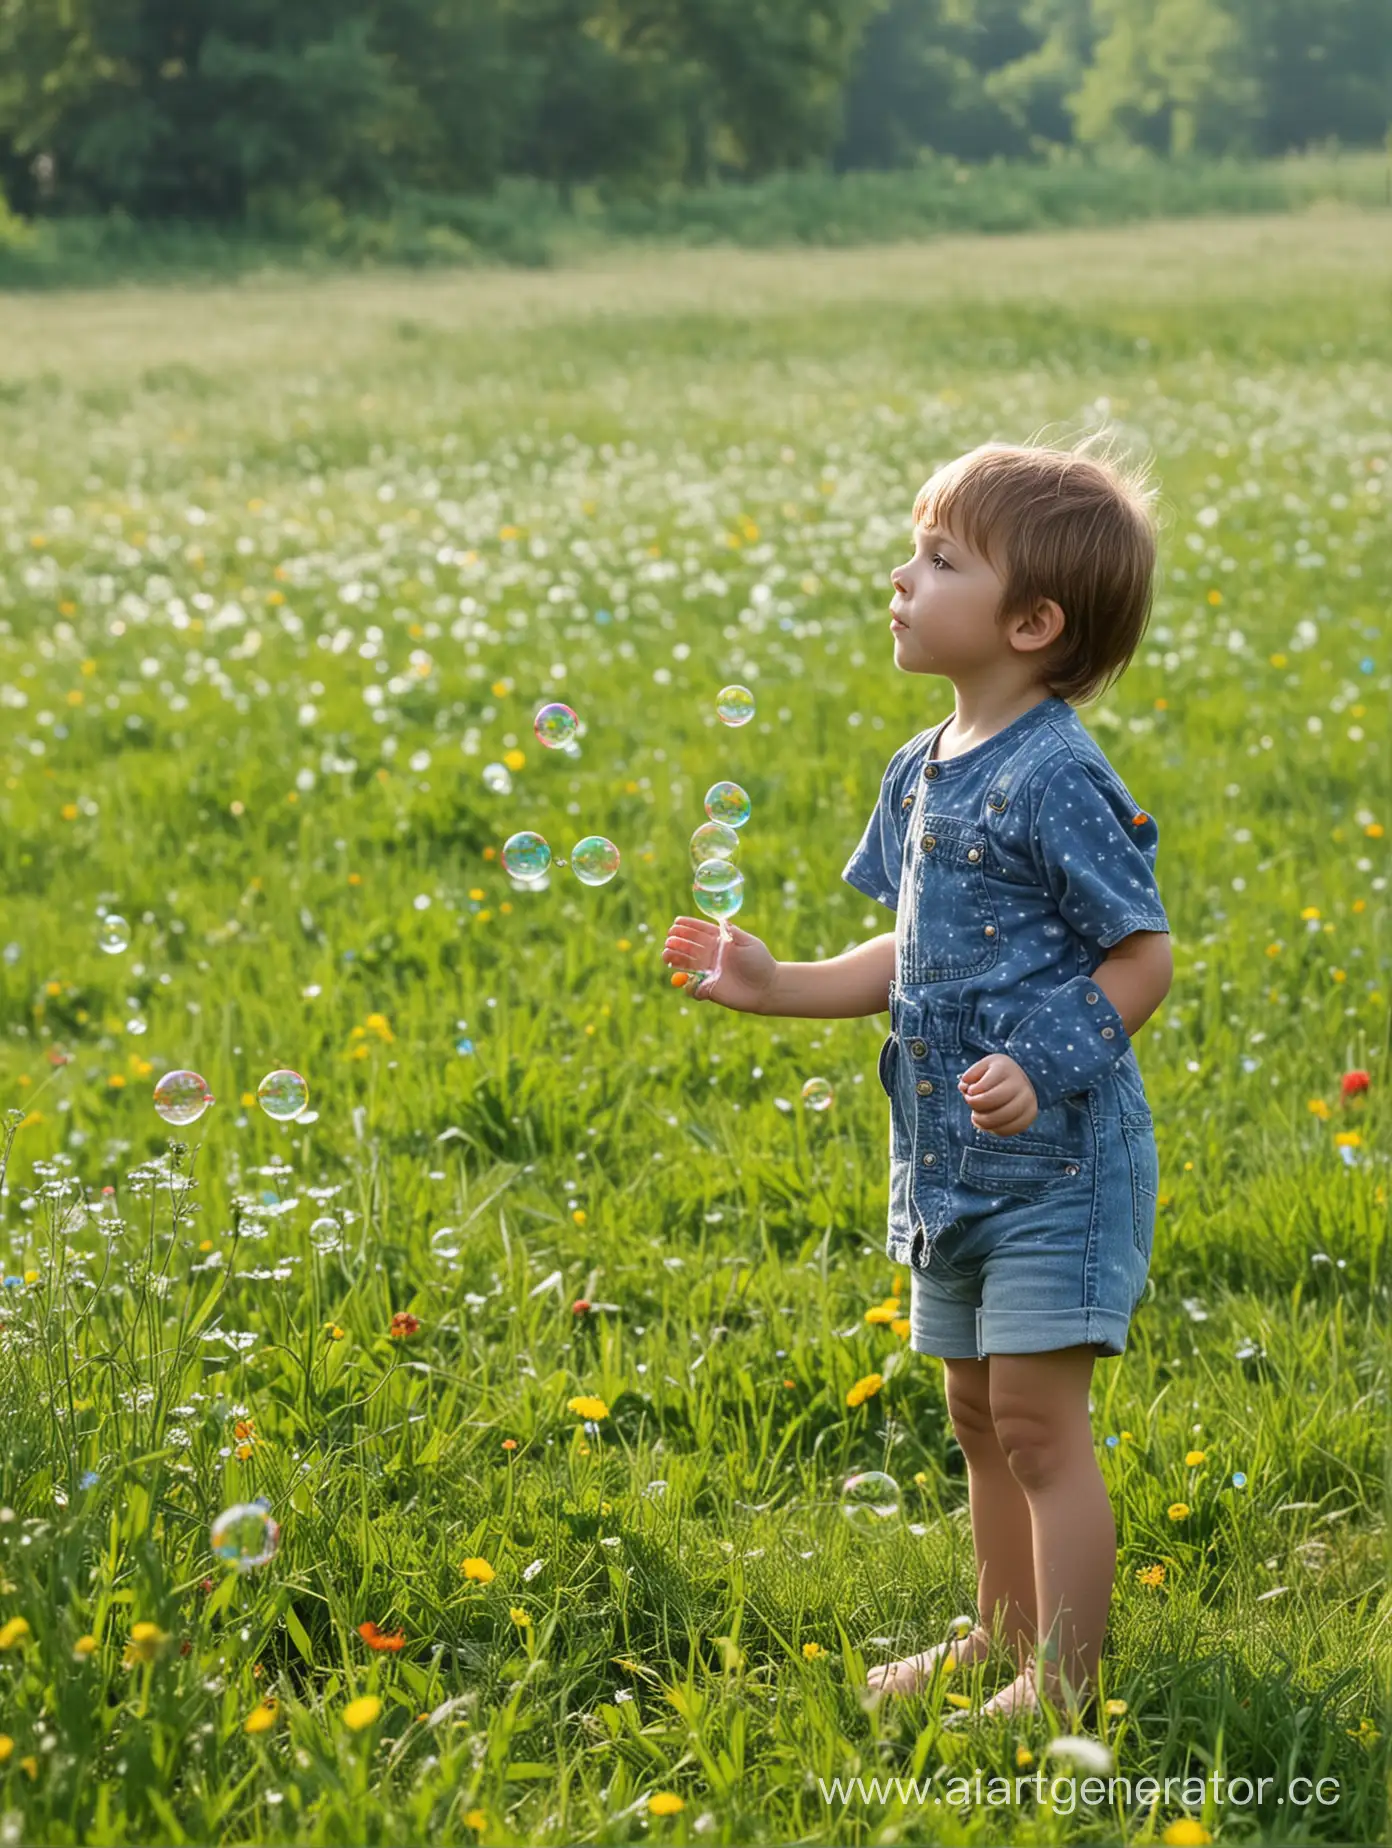 Child-Blowing-Soap-Bubbles-in-Meadow